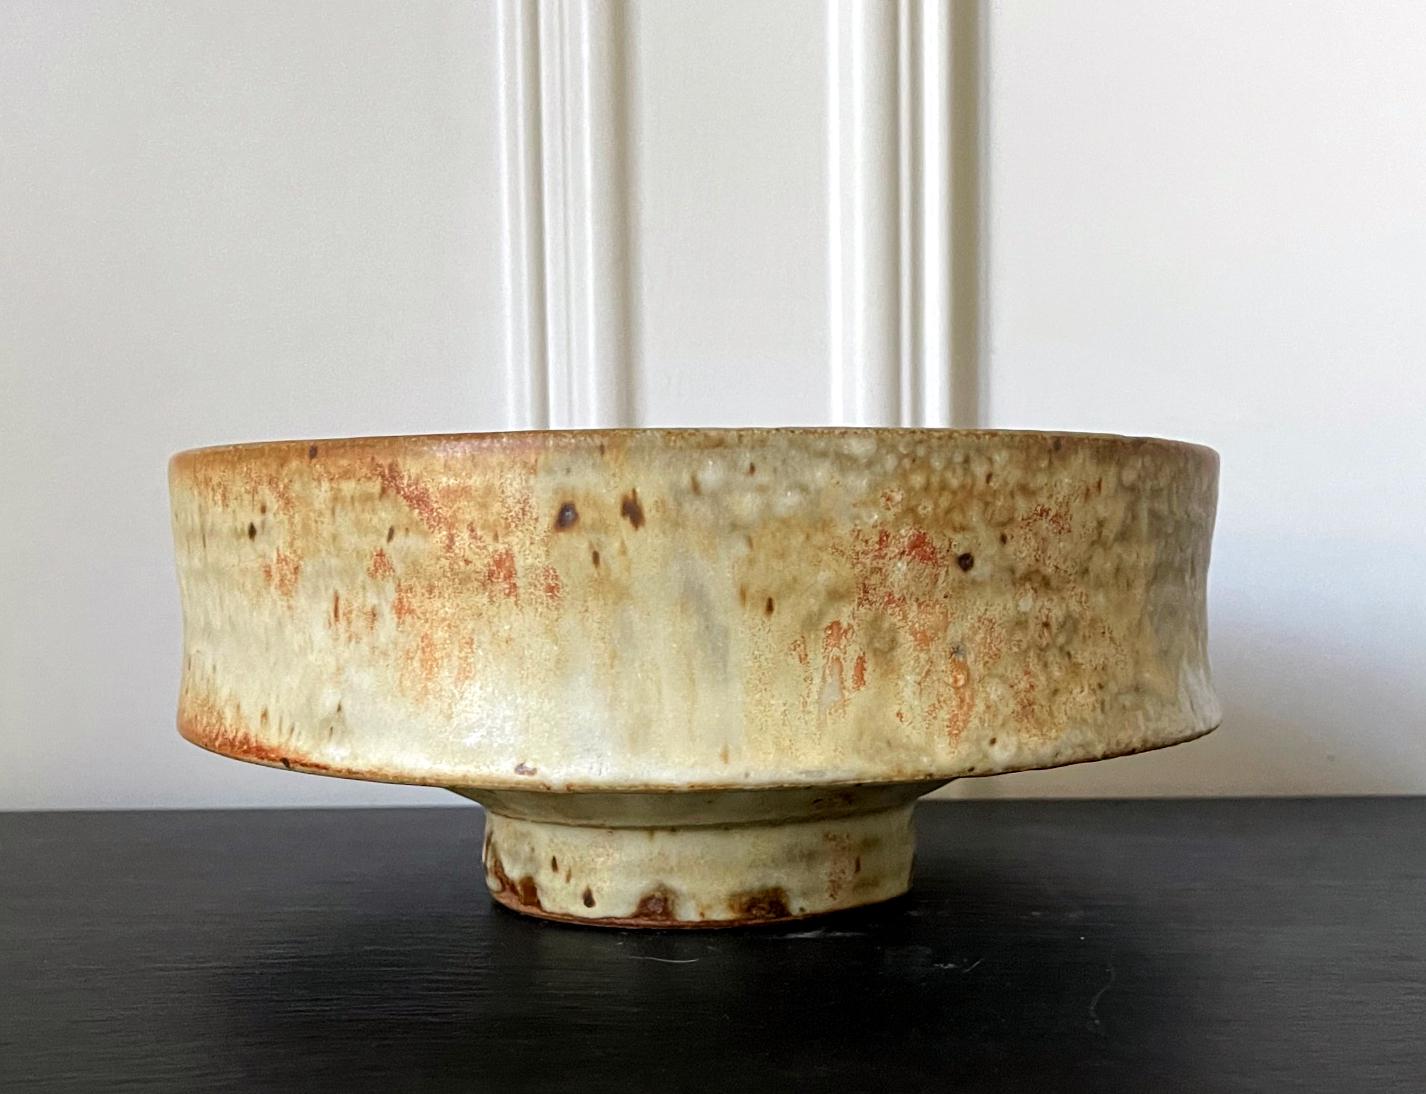 A very fine studio ceramic vessel with exceptional sculptural form by American potter Warren Mackenzie (1924-2018). In a barrel shape with slightly concaved wall, the centerpiece stands on a circular foot. The stoneware was glazed in a greenish